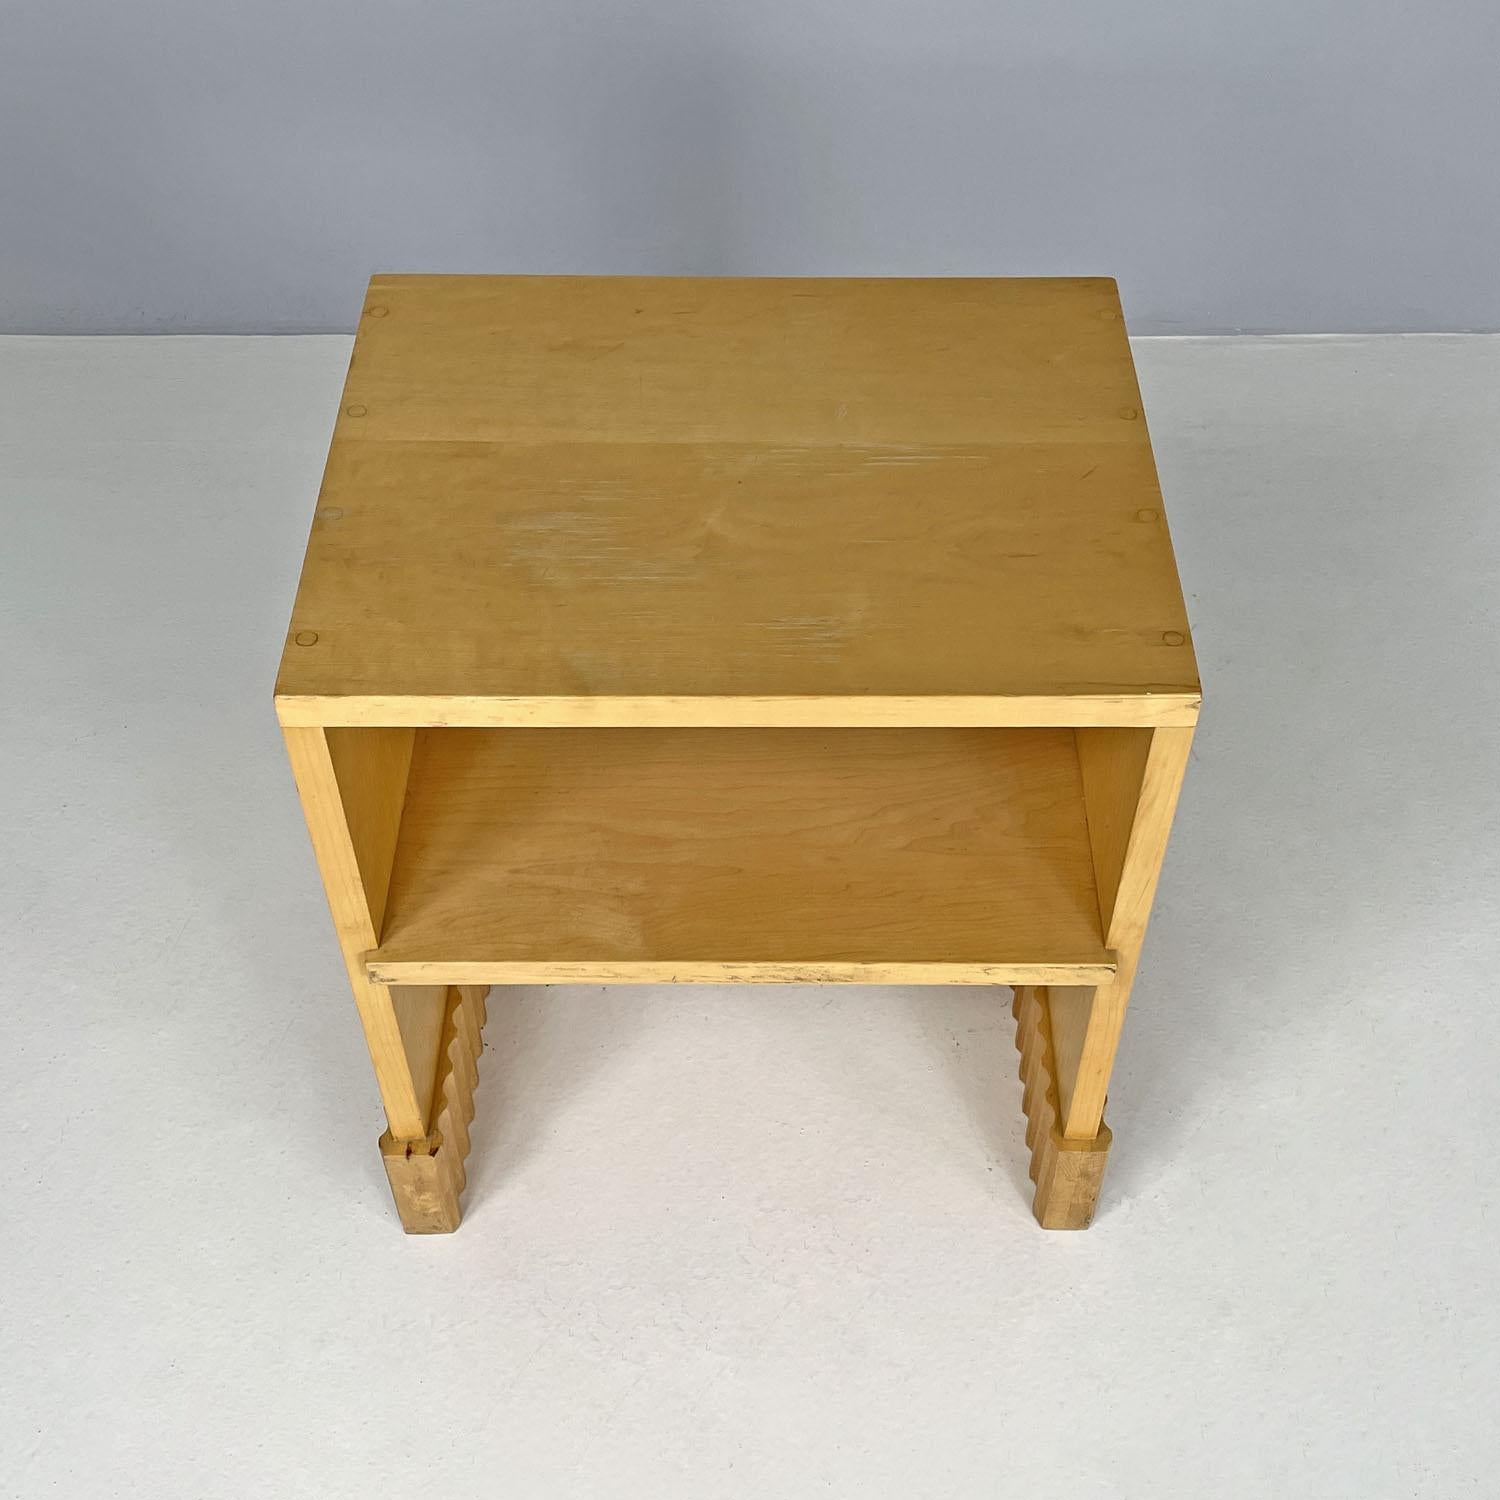 Wood American postmodern rectangular wooden coffee table by AQQ, 1990s For Sale